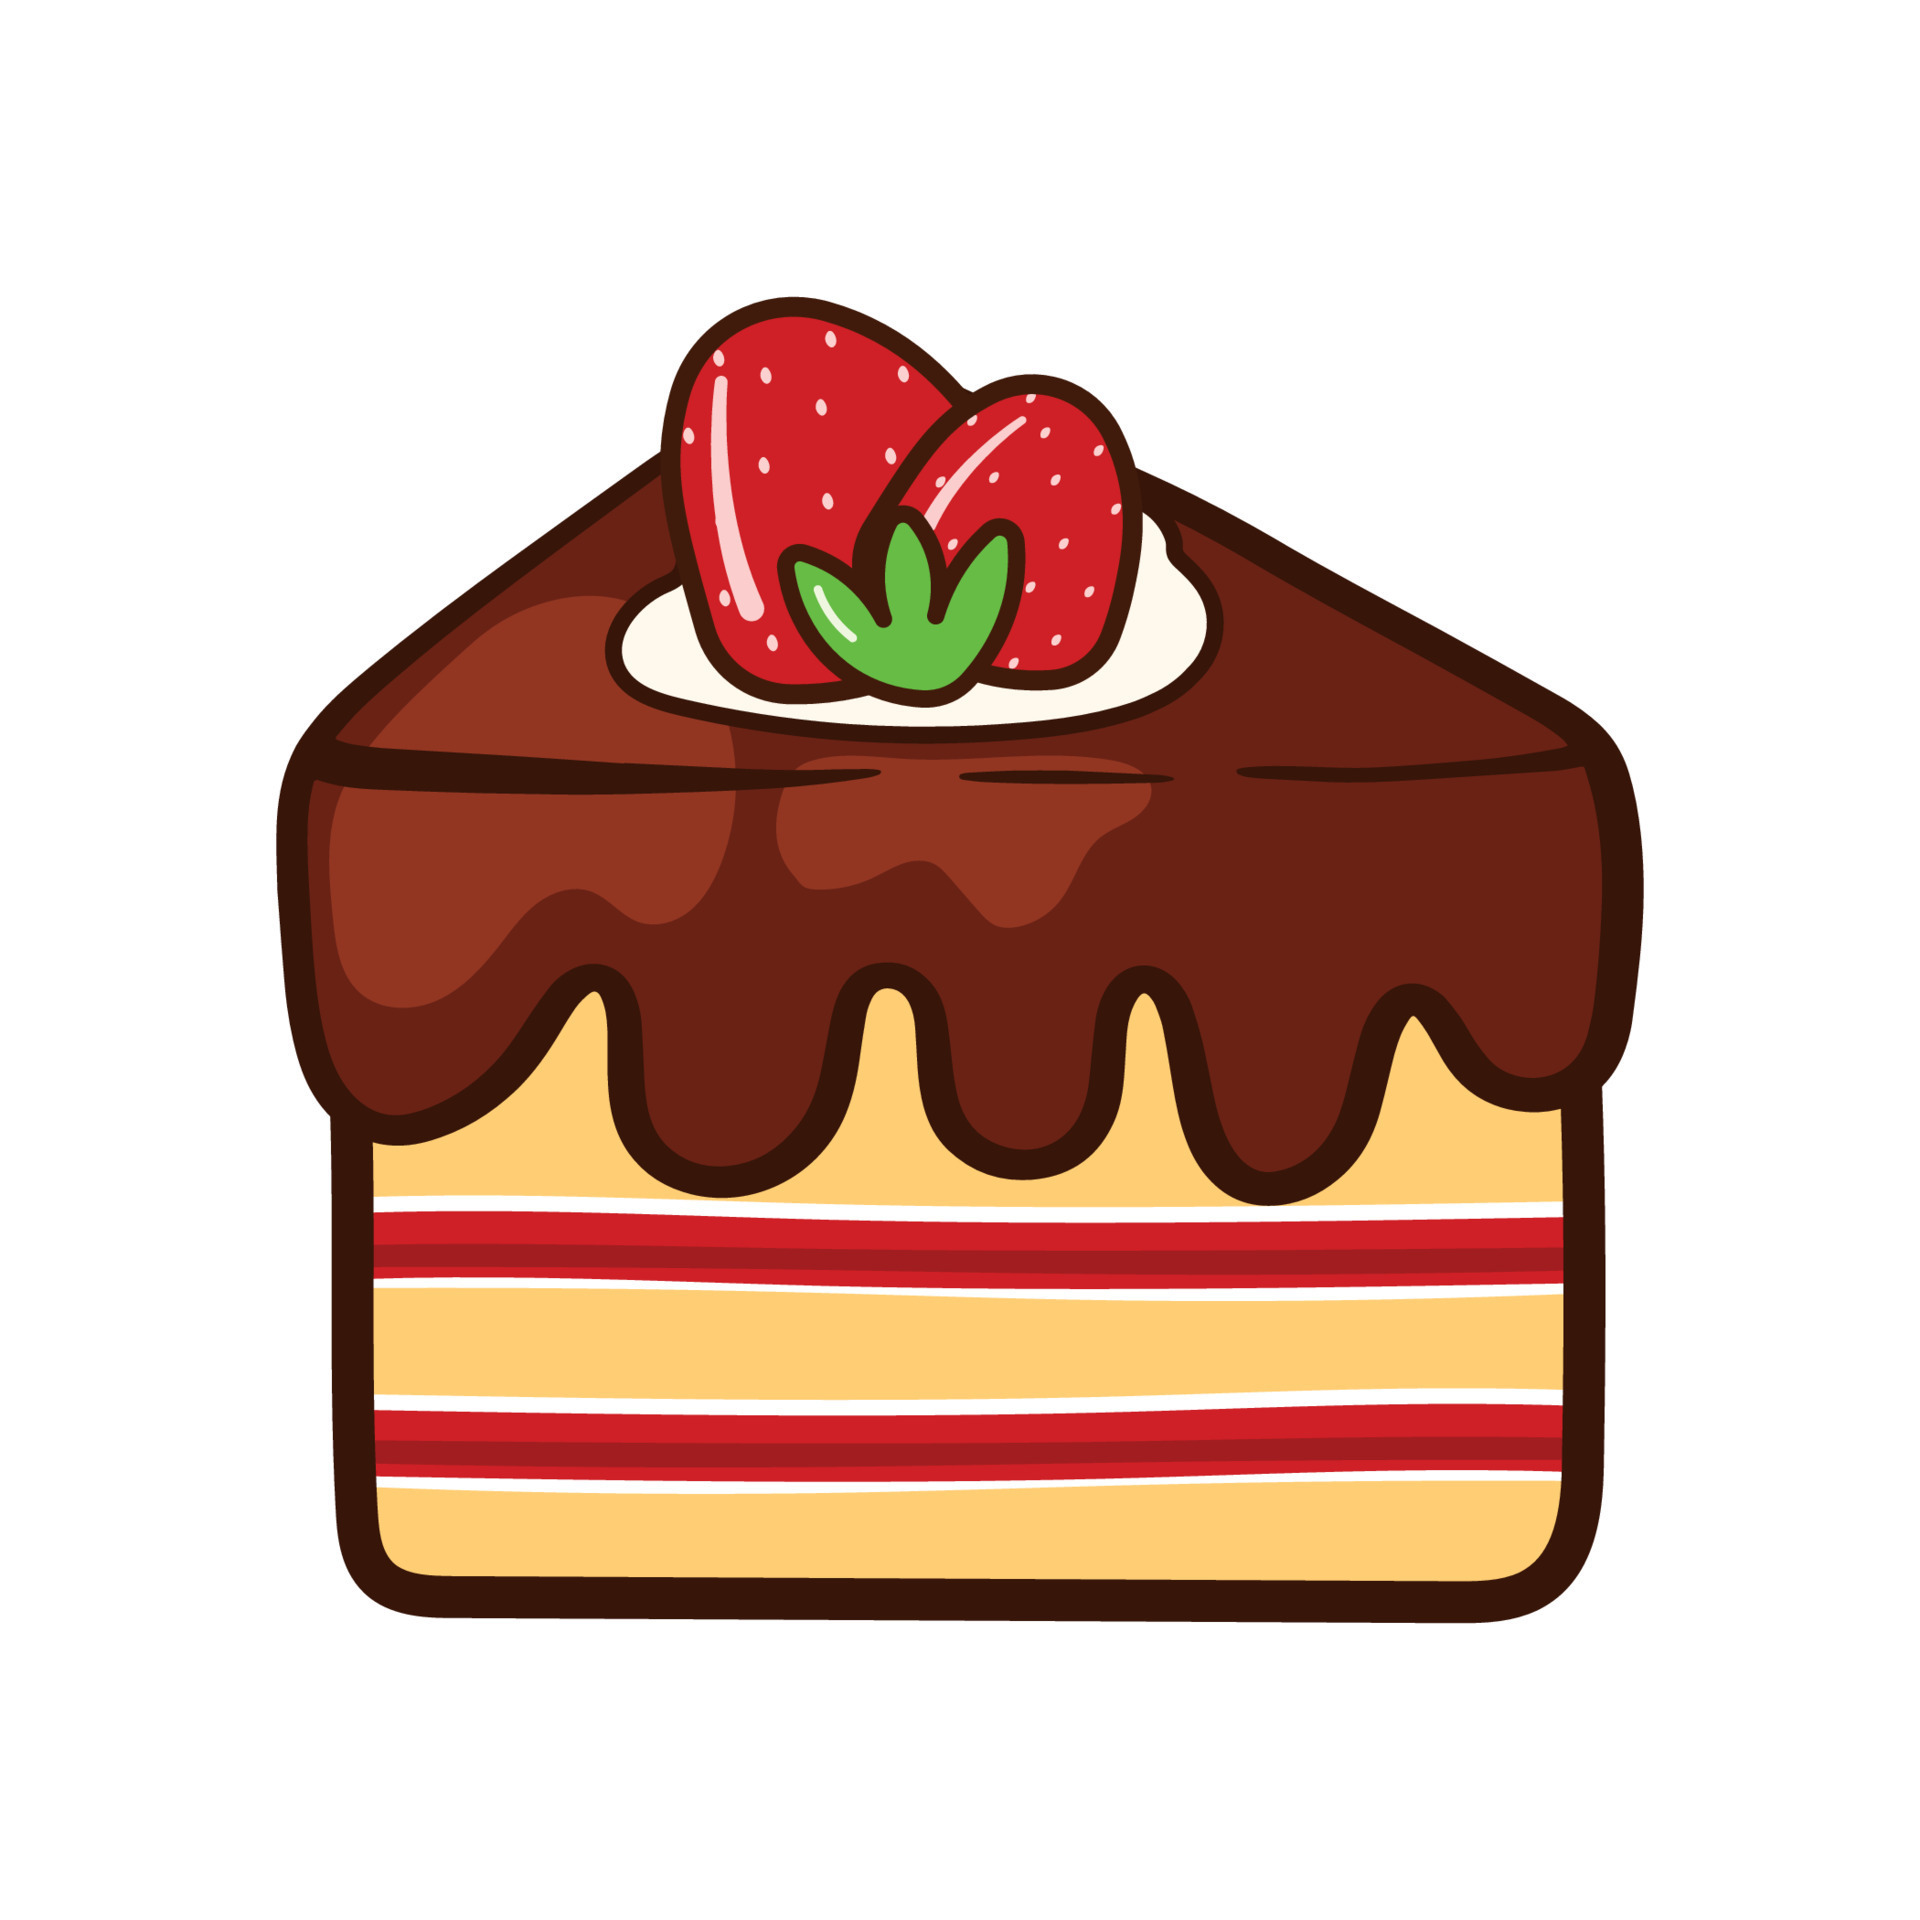 Cake Slice Illustration Images | Free Photos, PNG Stickers, Wallpapers &  Backgrounds - rawpixel